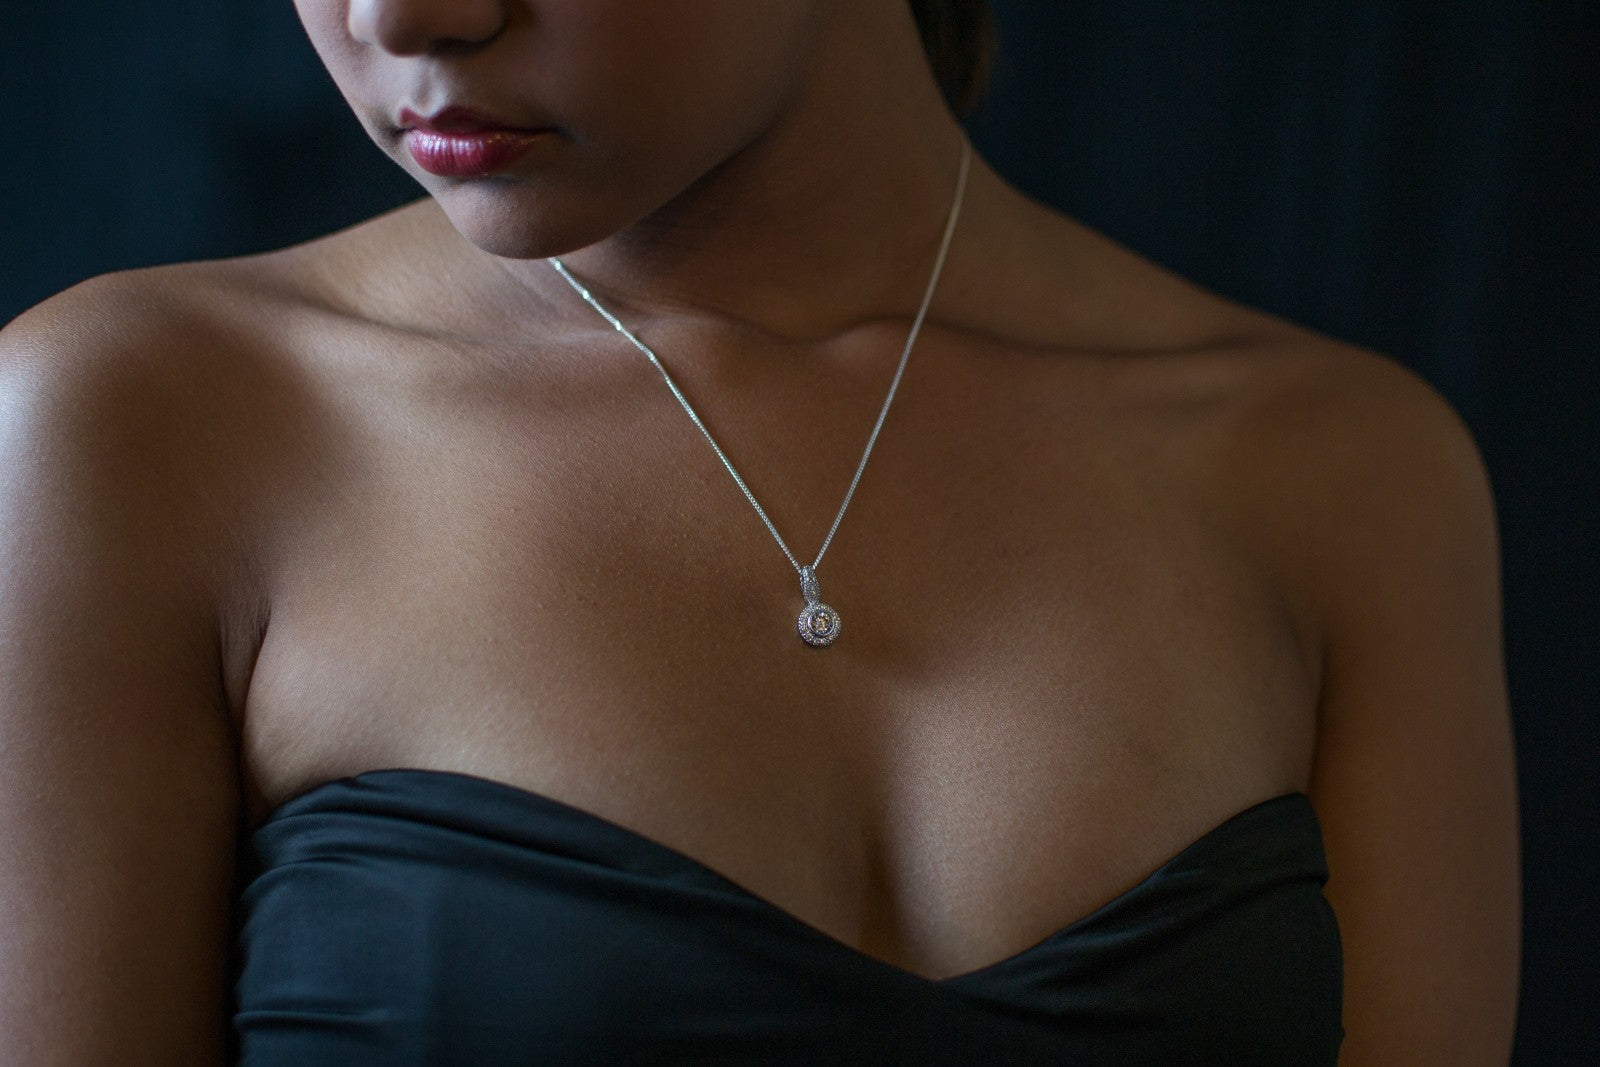 How to choose the perfect necklace for your neckline